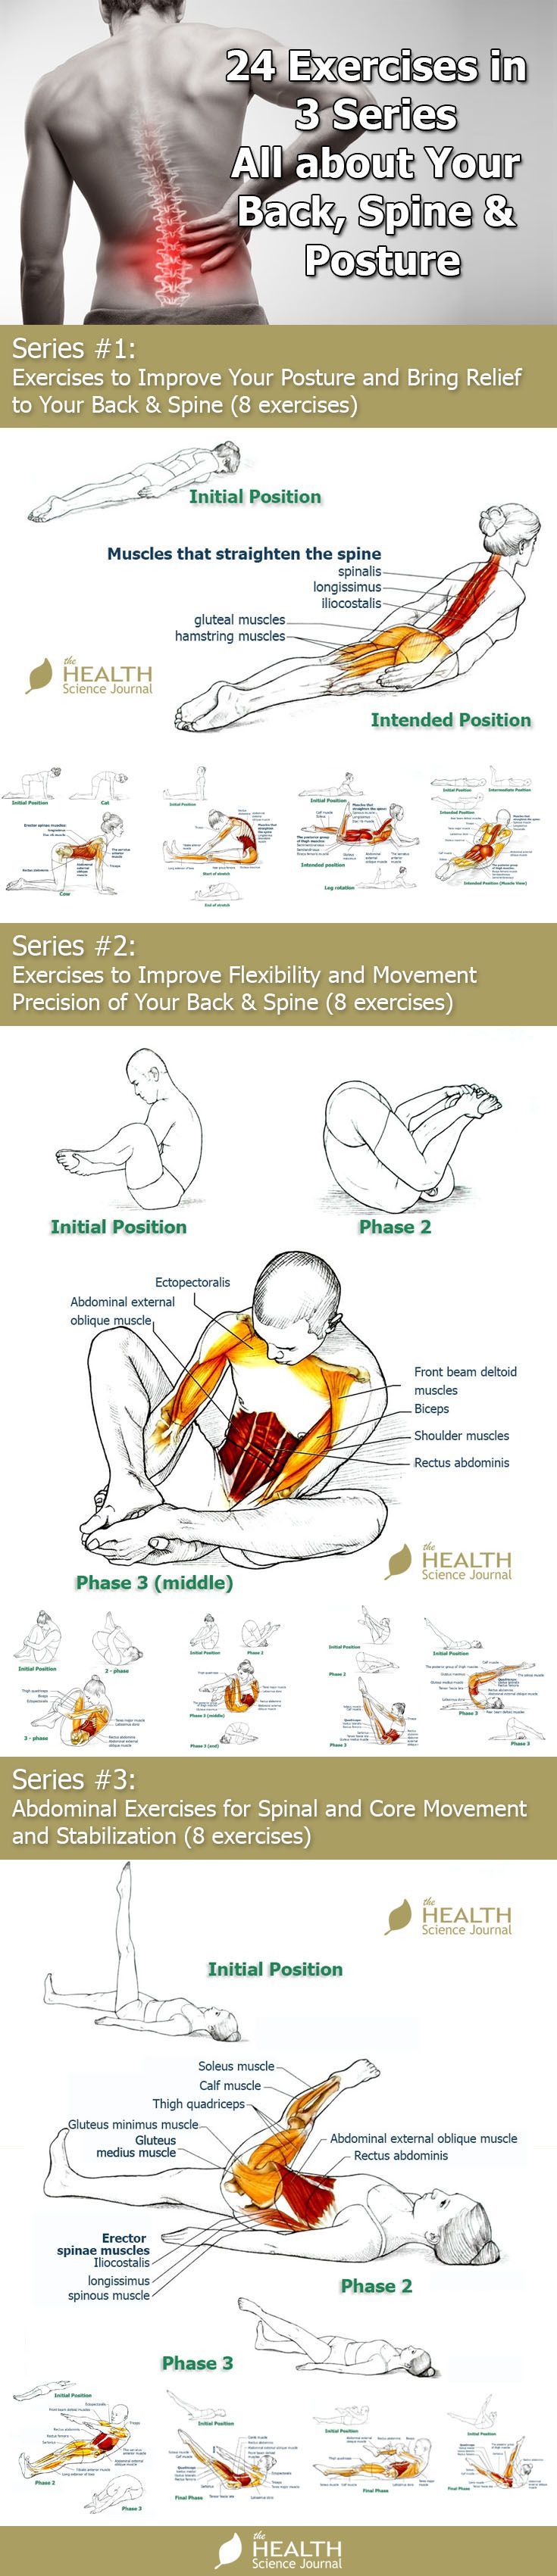 24 Exercises in 3 Series – All about Your Back, Spine & Posture – The Health Science Journal